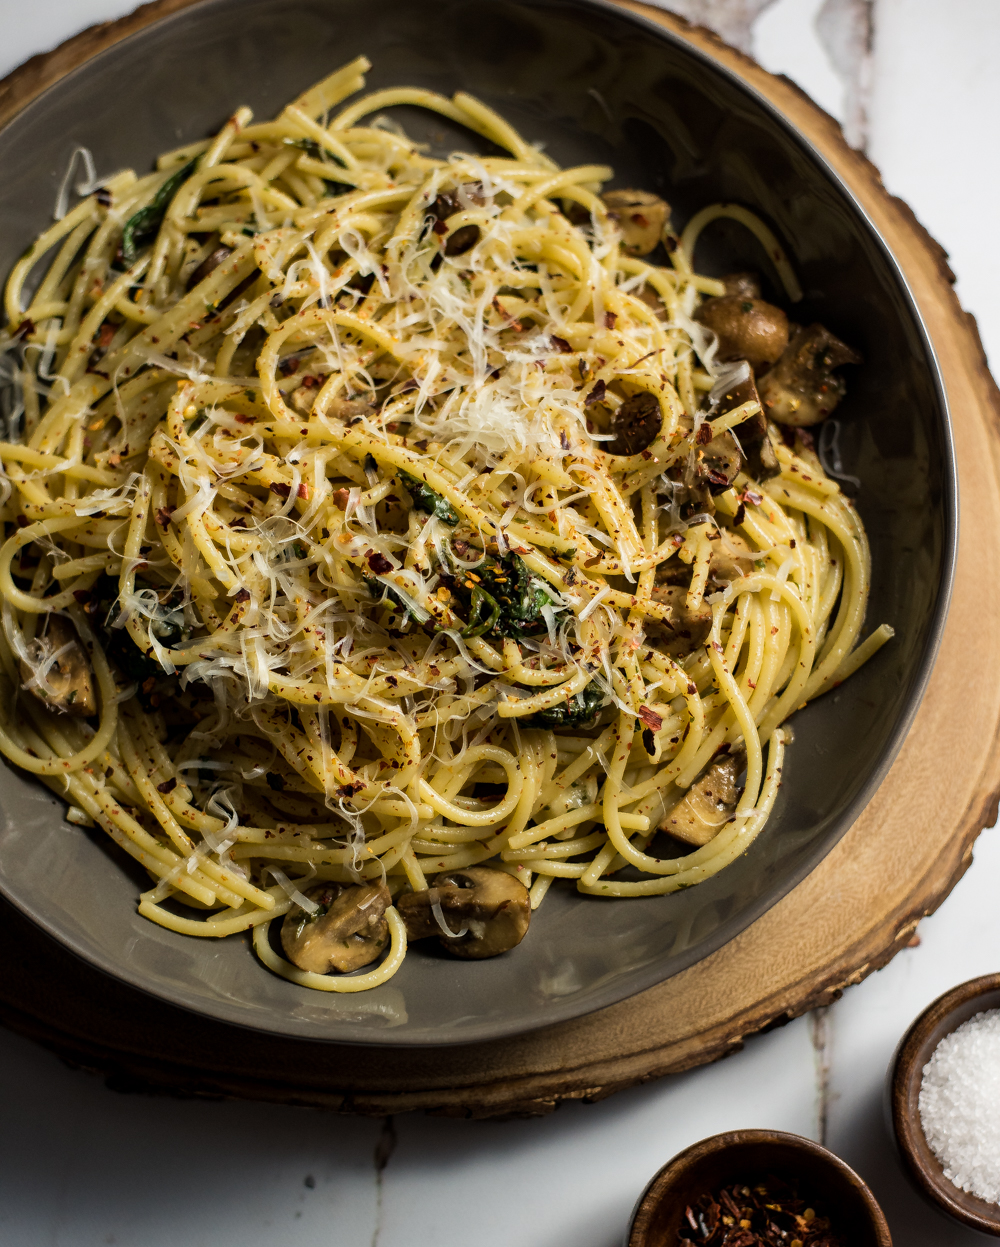 The sound of Spaghetti Aglio e Olio with Wilted Spinach and Mushrooms may sound intimidating, but this classic Italian dish with a twist, is super simple!